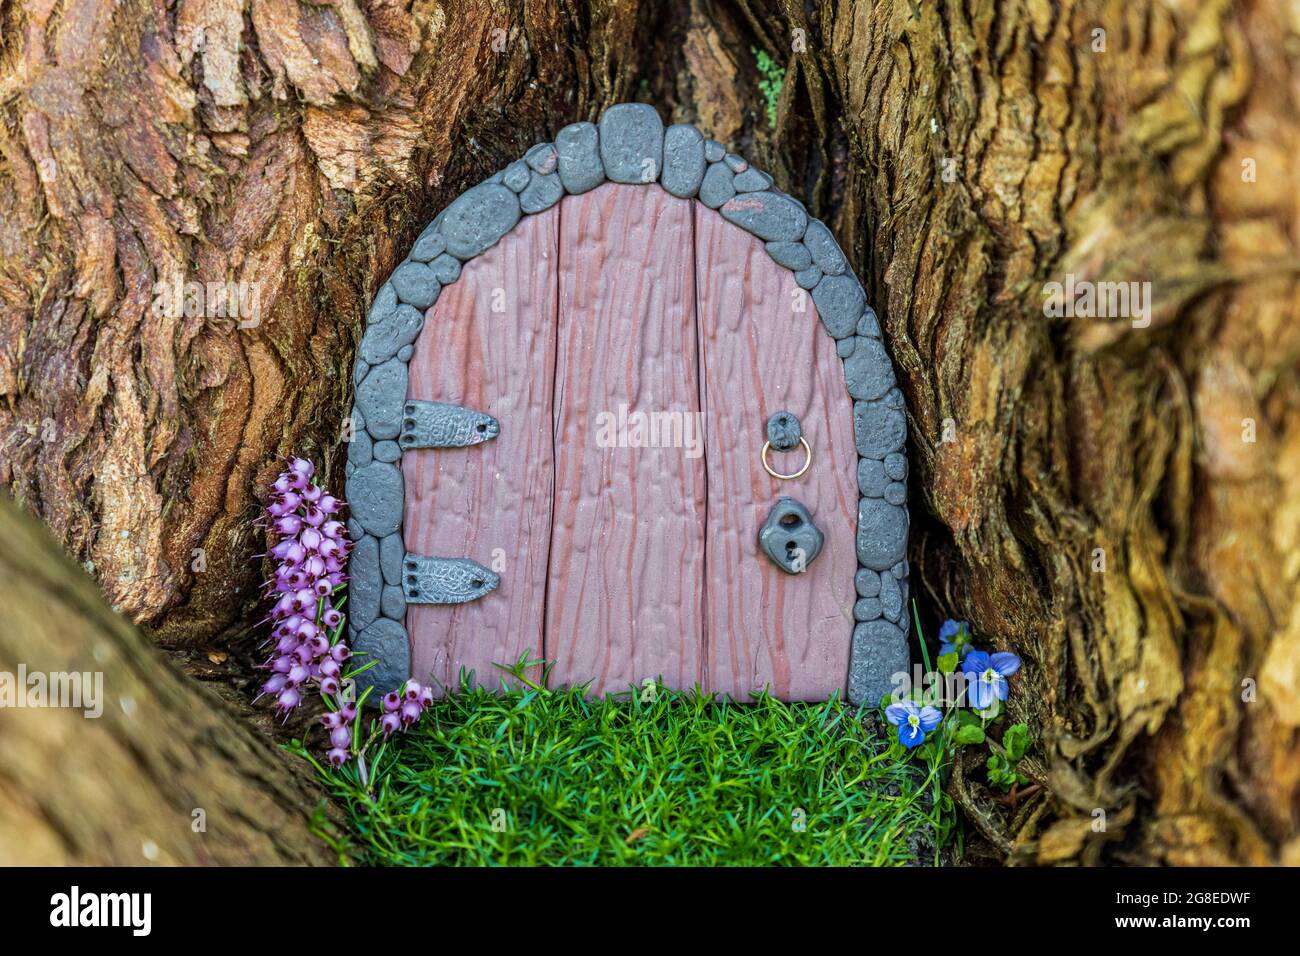 Little fairy tale door made from clay in a tree trunk with purple and blue flowers. Stock Photo